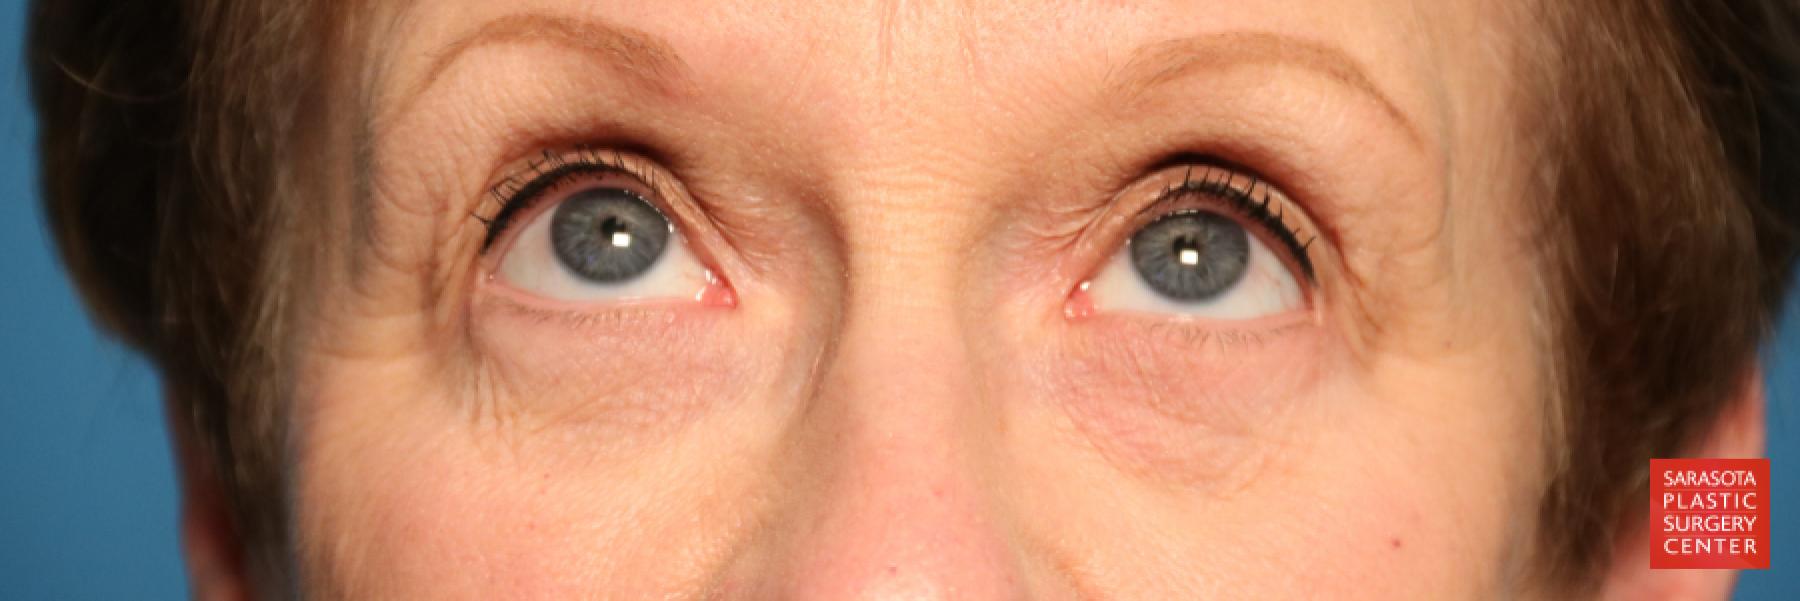 Eyelid Lift: Patient 20 - Before 2